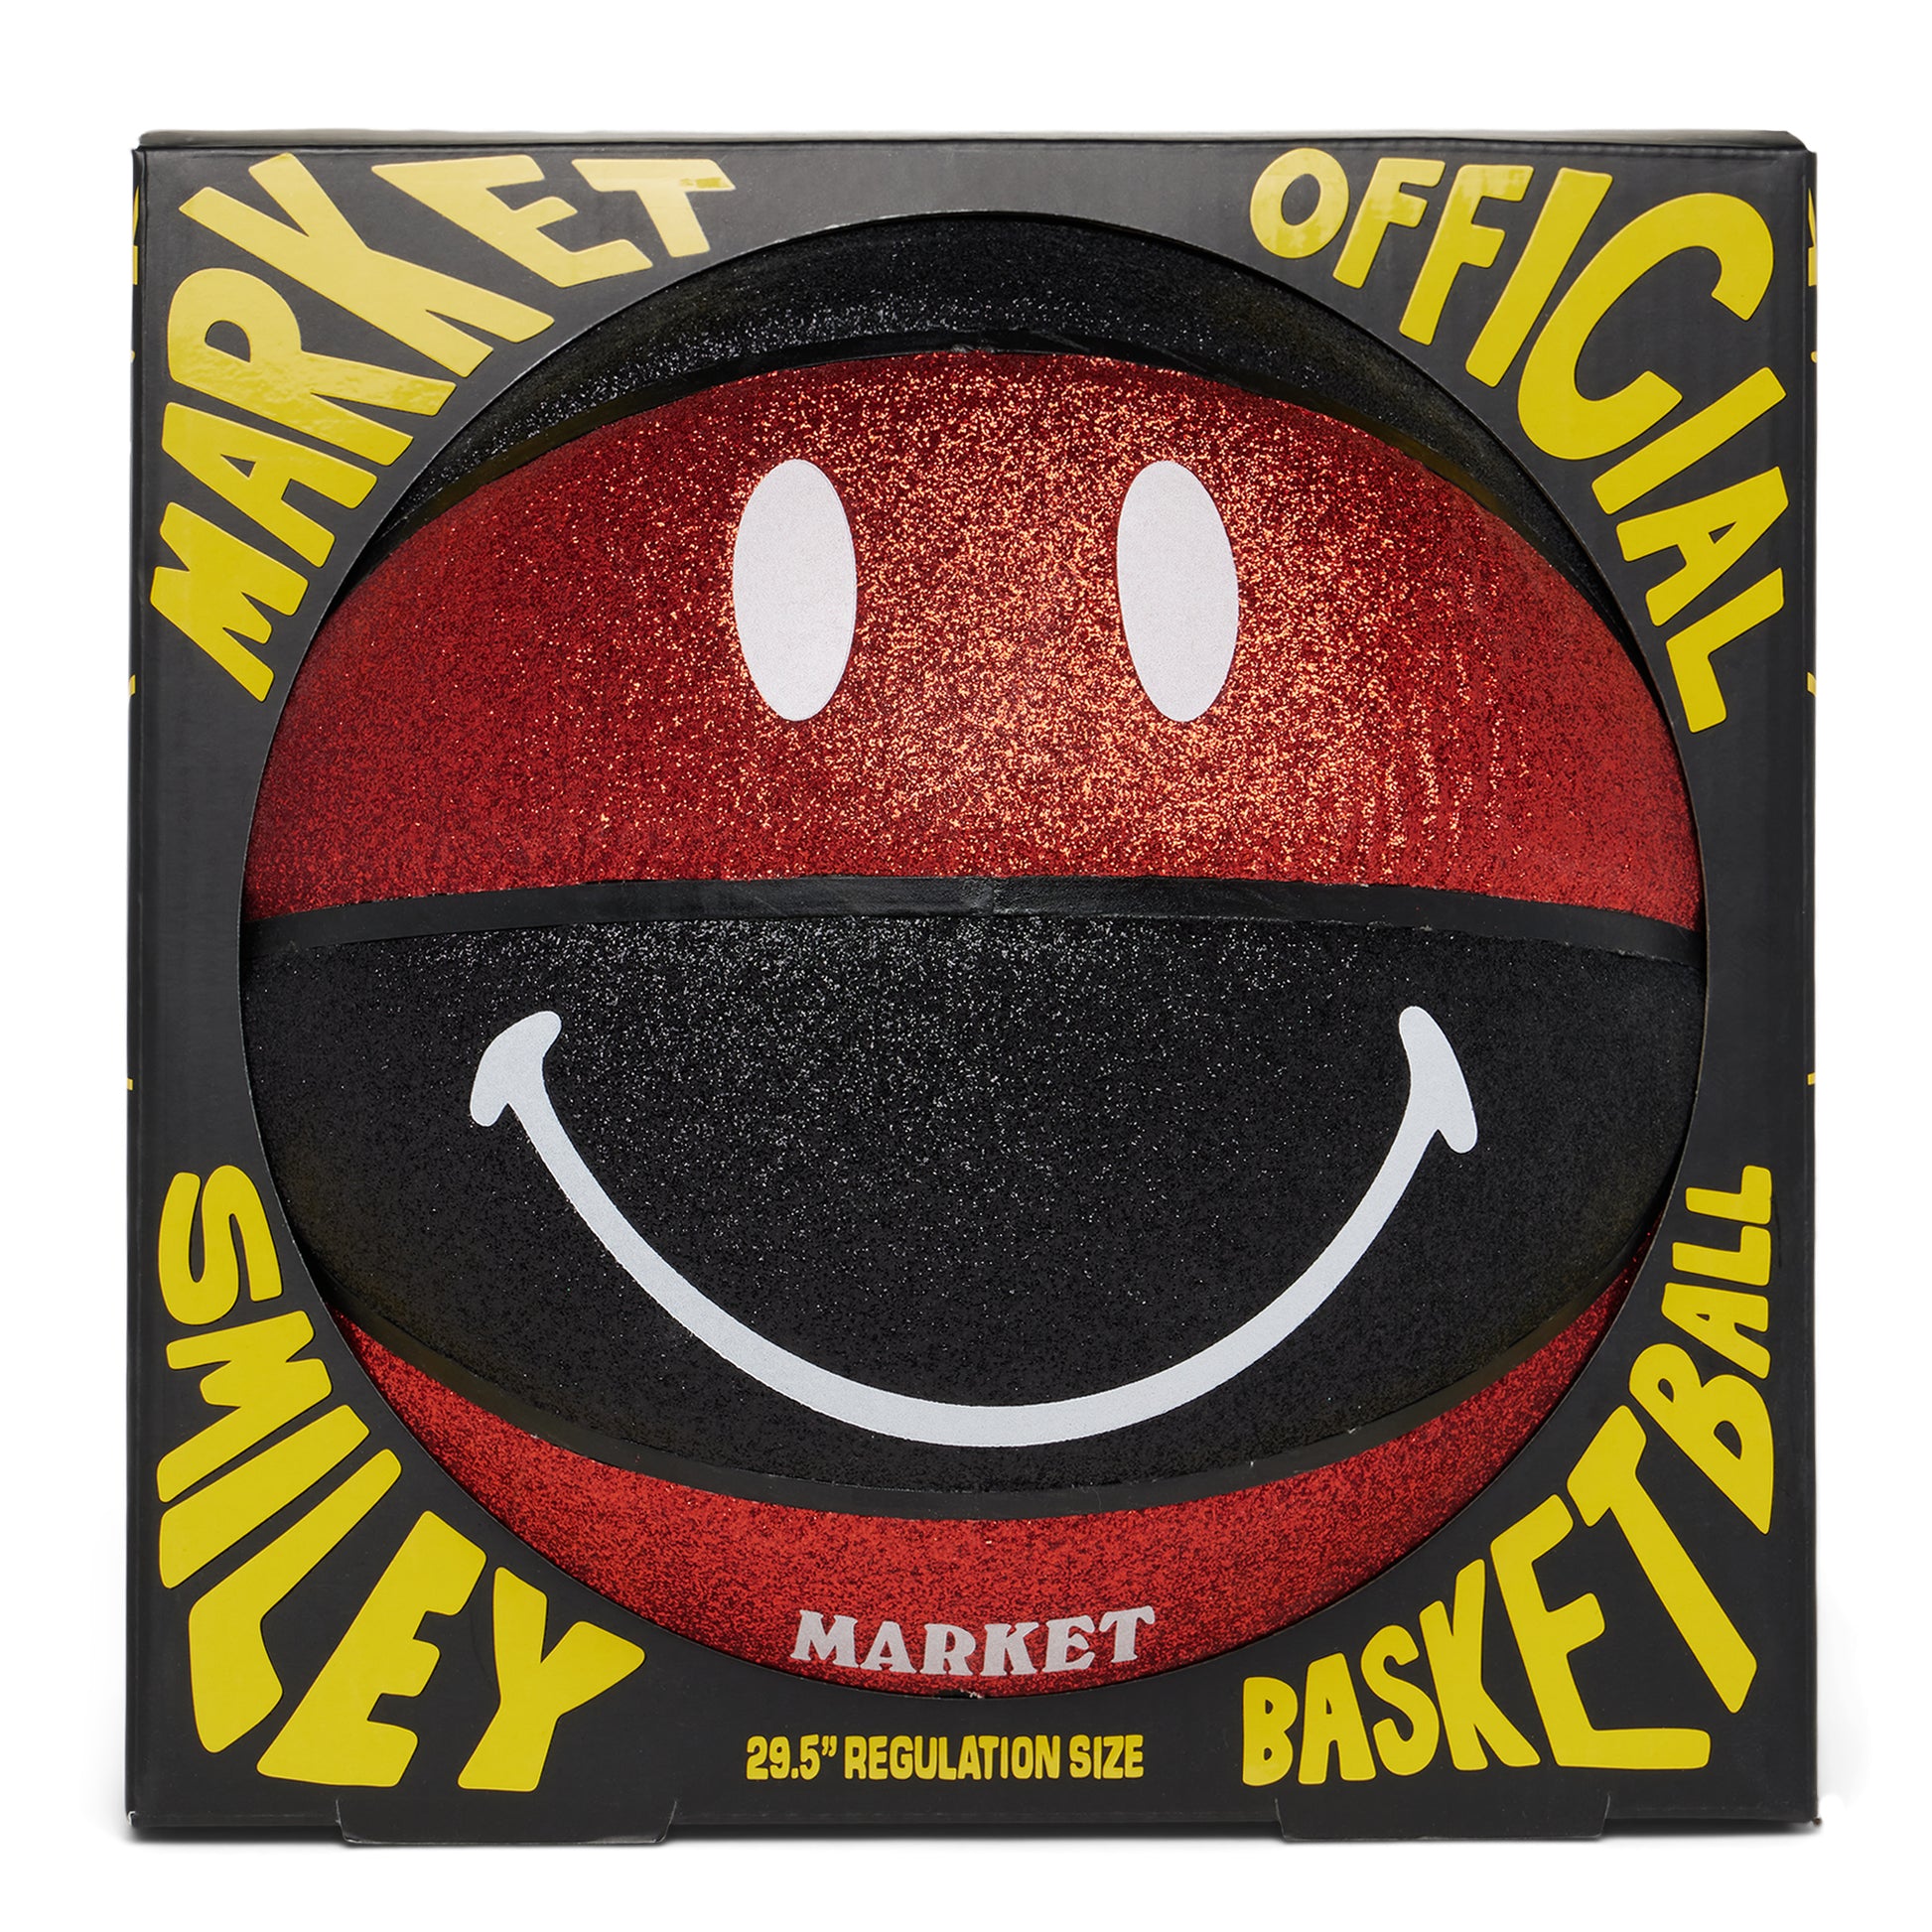 MARKET clothing brand SMILEY GLITTER WINDY CITY BASKETBALL. Find more basketballs, sporting goods, homegoods and graphic tees at MarketStudios.com. Formally Chinatown Market. 